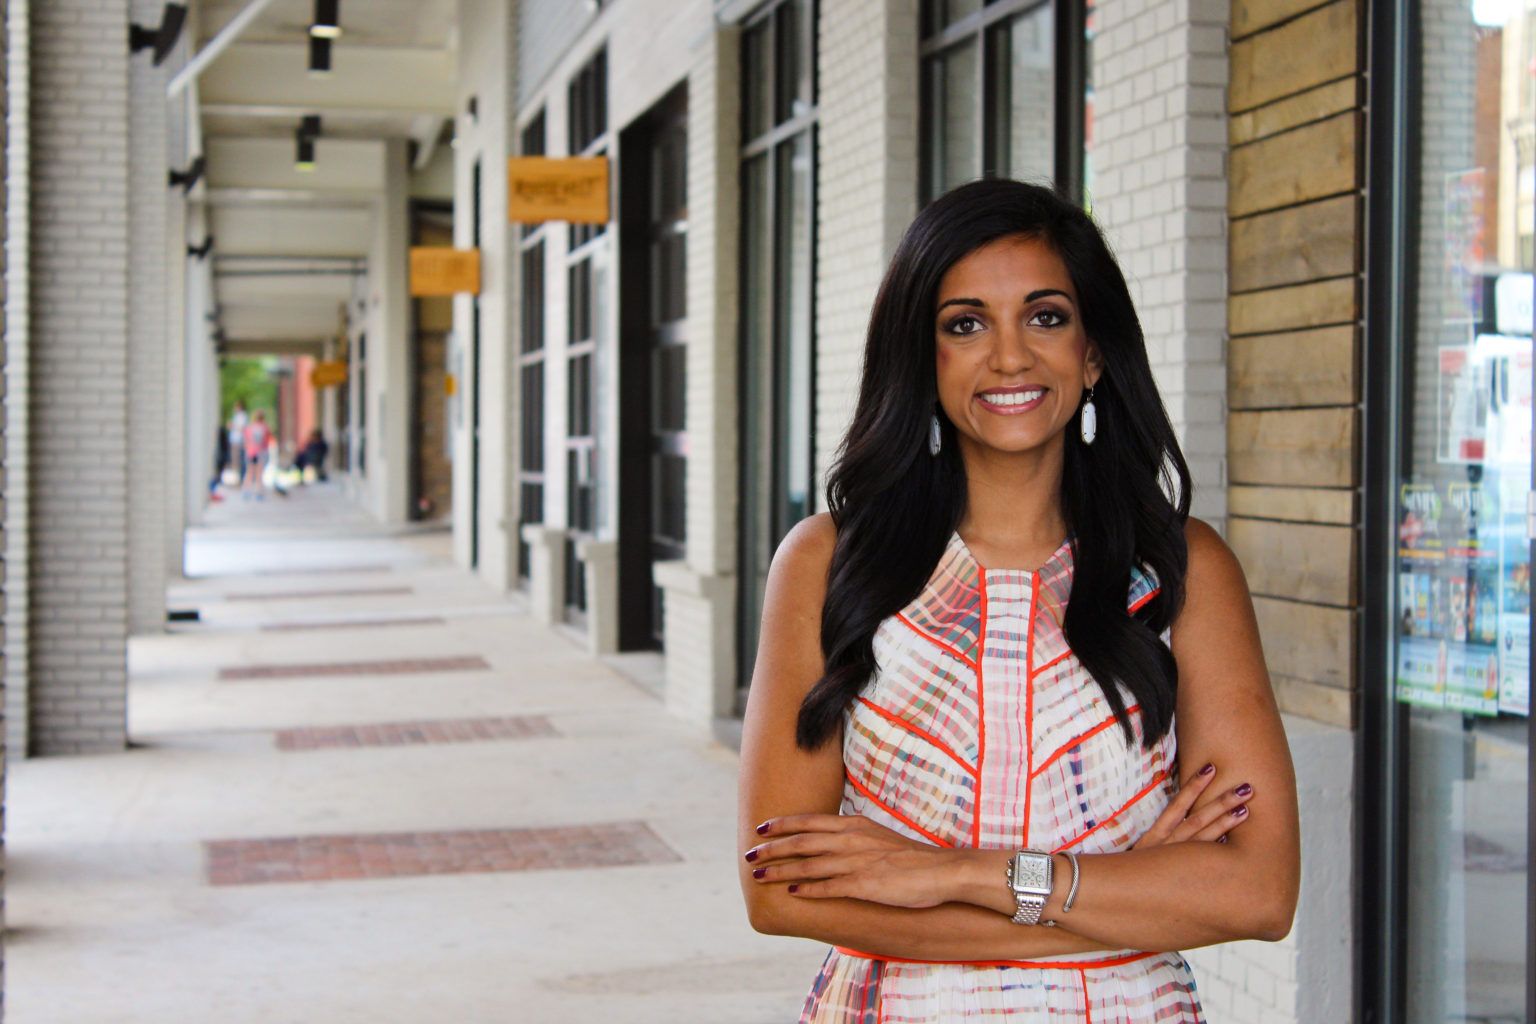 anusha alapati, crunkleton, crunkleton commercial real estate group, crunkleton associates, brokerage, leasing, property management, investment consulting, client resources, commercial real estate, properties, real estate, real estate agents, huntsville, madison, athens, decatur, gadsden, scottsboro, muscle shoals, al